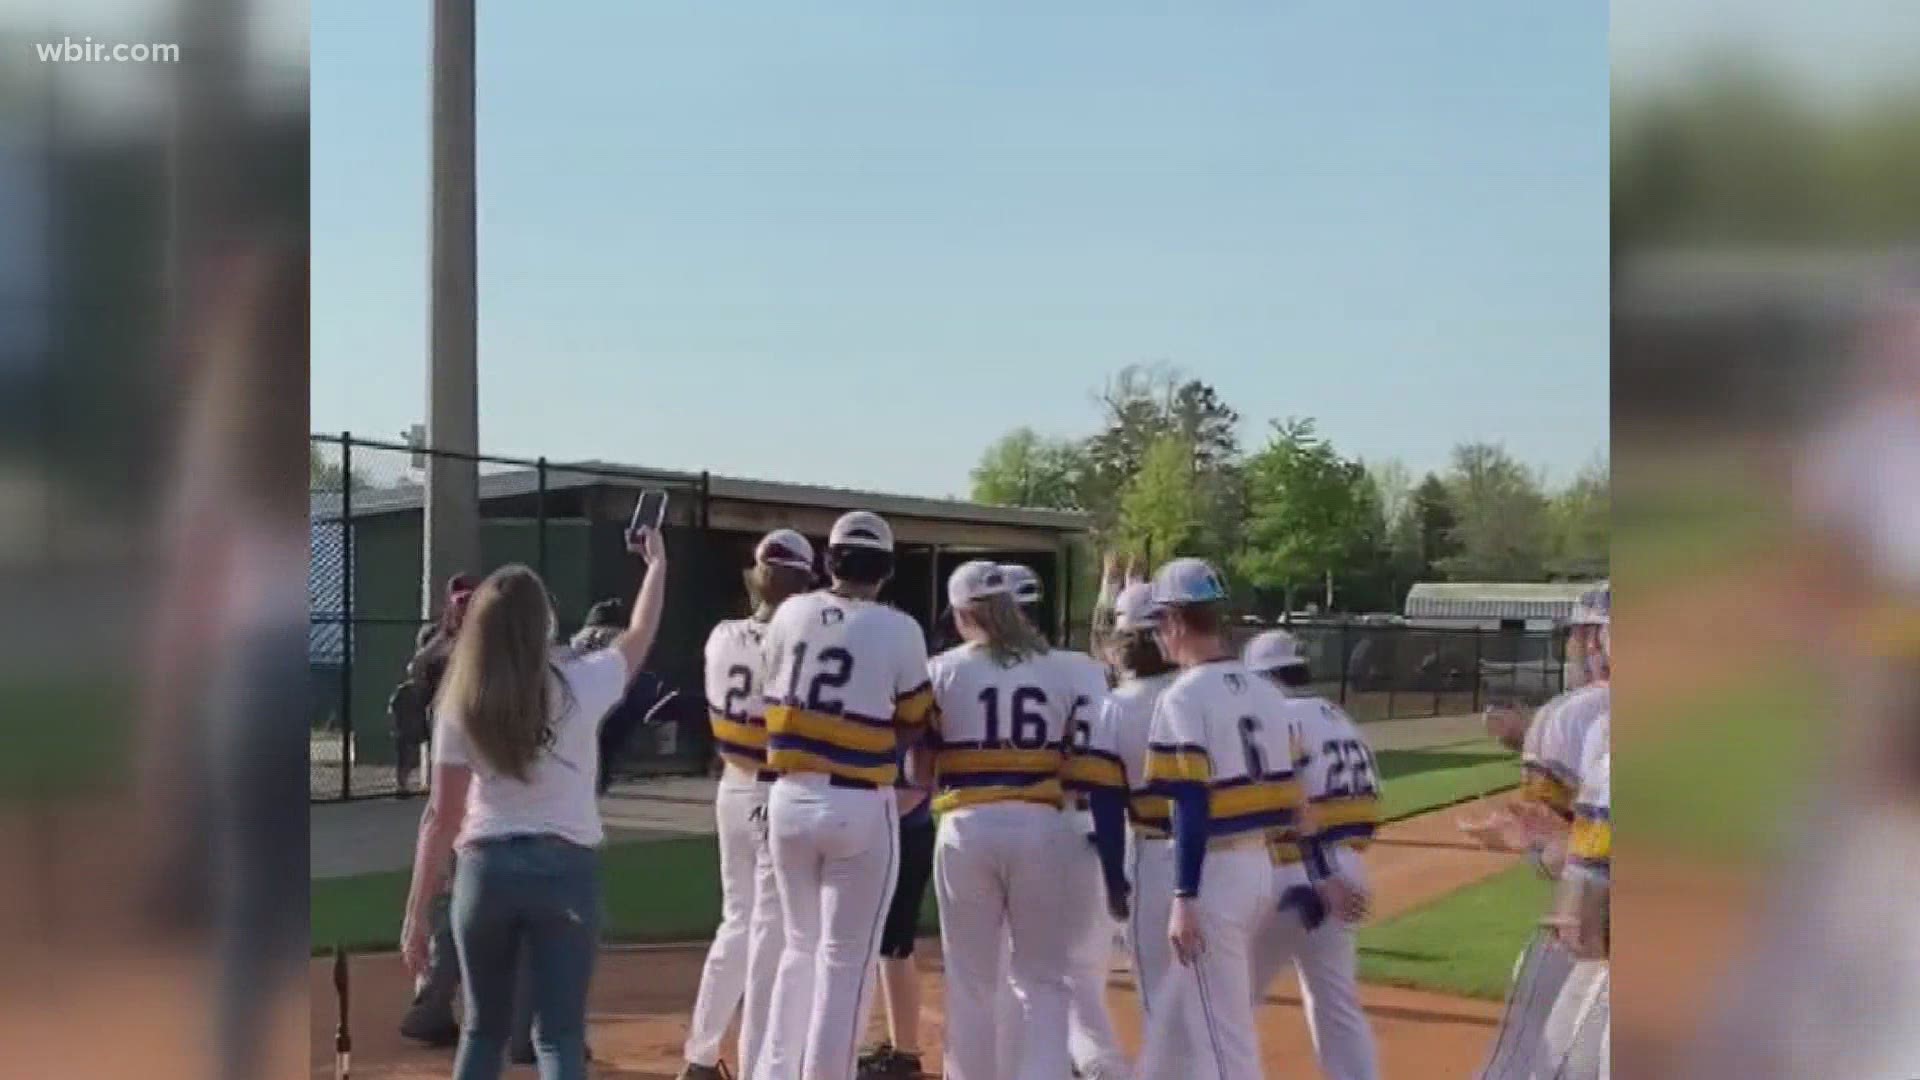 Two high school baseball teams came together to make a special moment happen for a classmate all the students love!